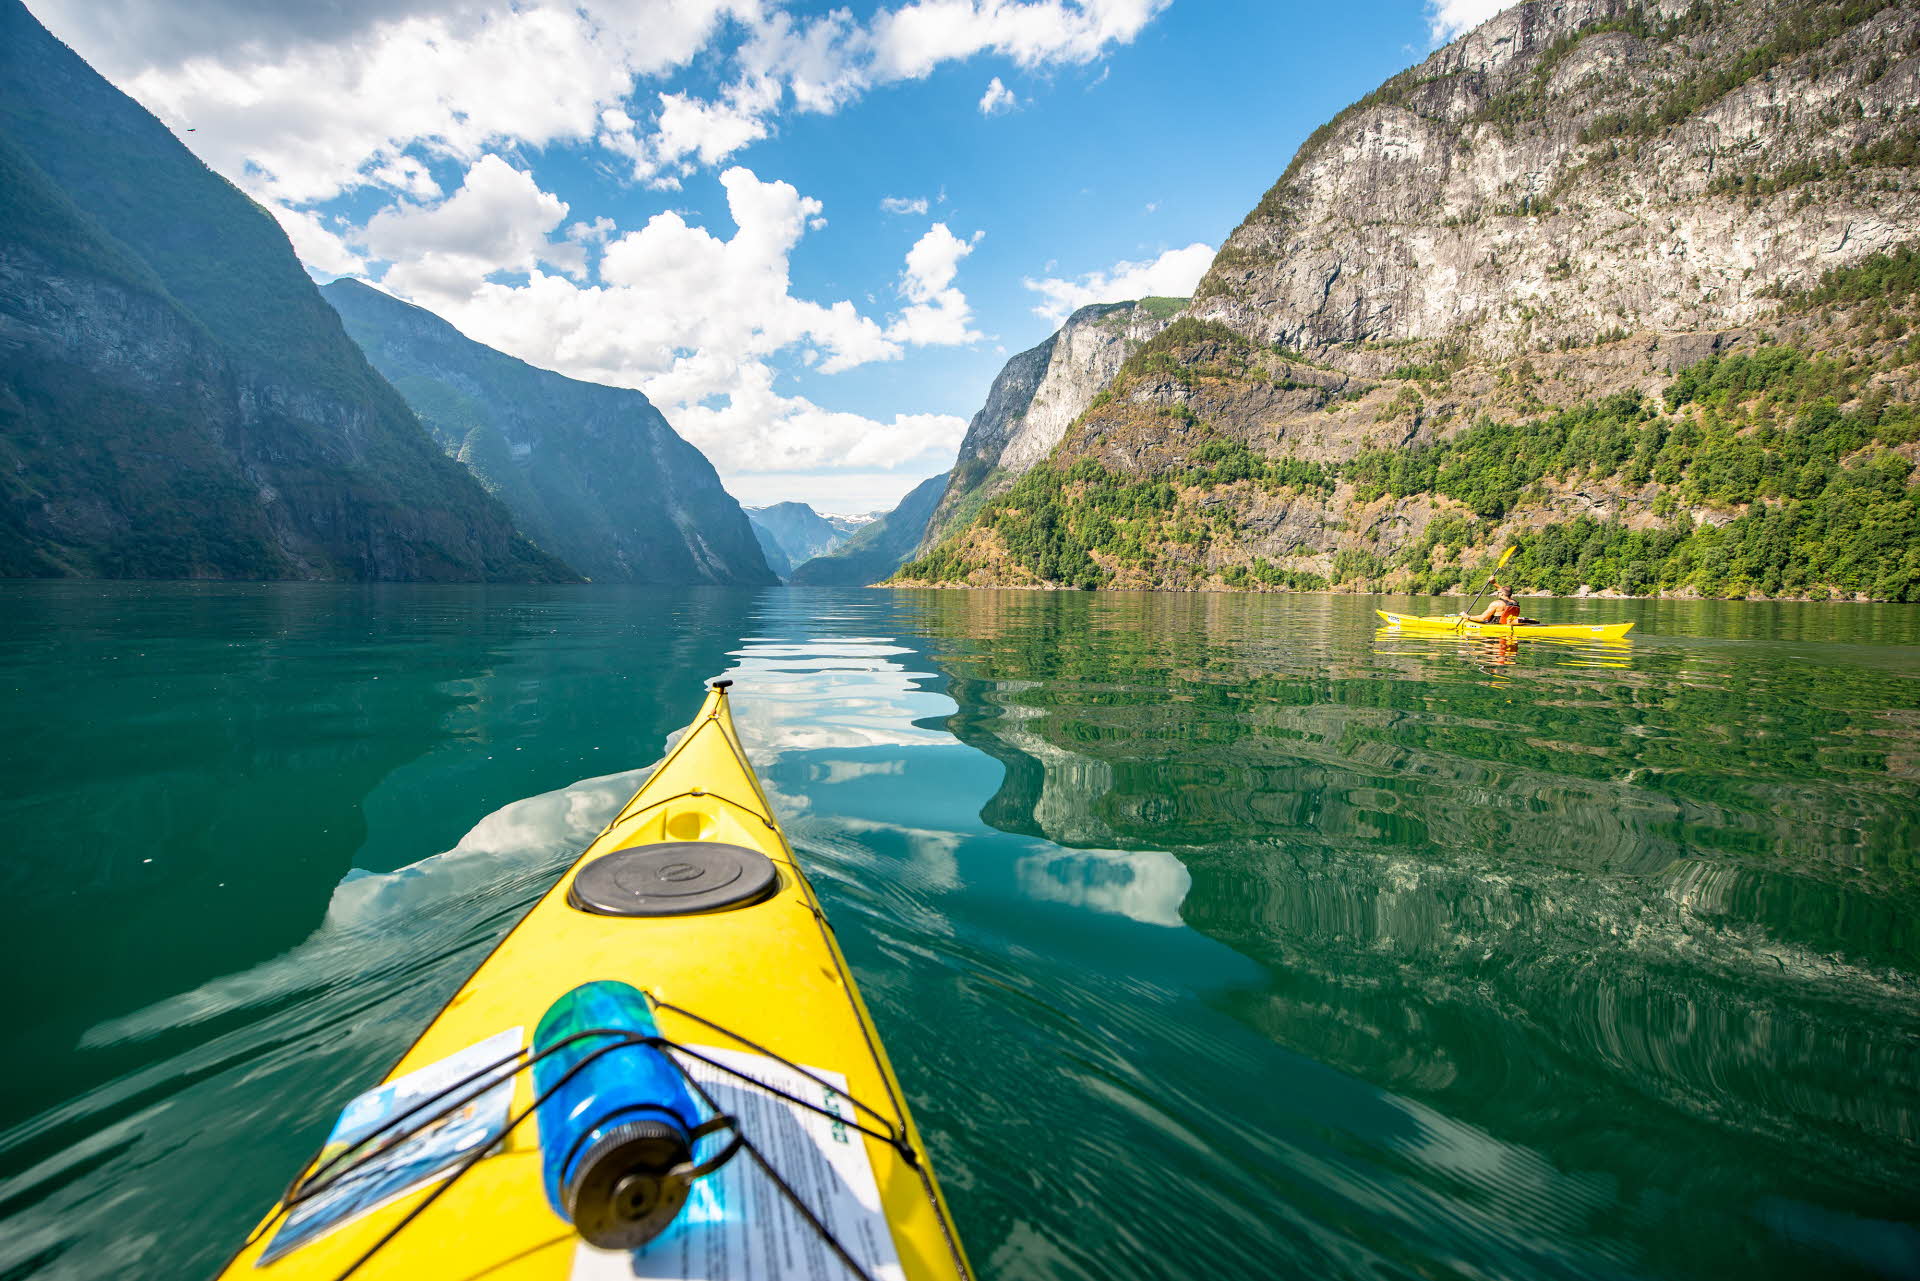 One half of a yellow kayak in the foreground, a view of another kayak and the mountains along the fjord.